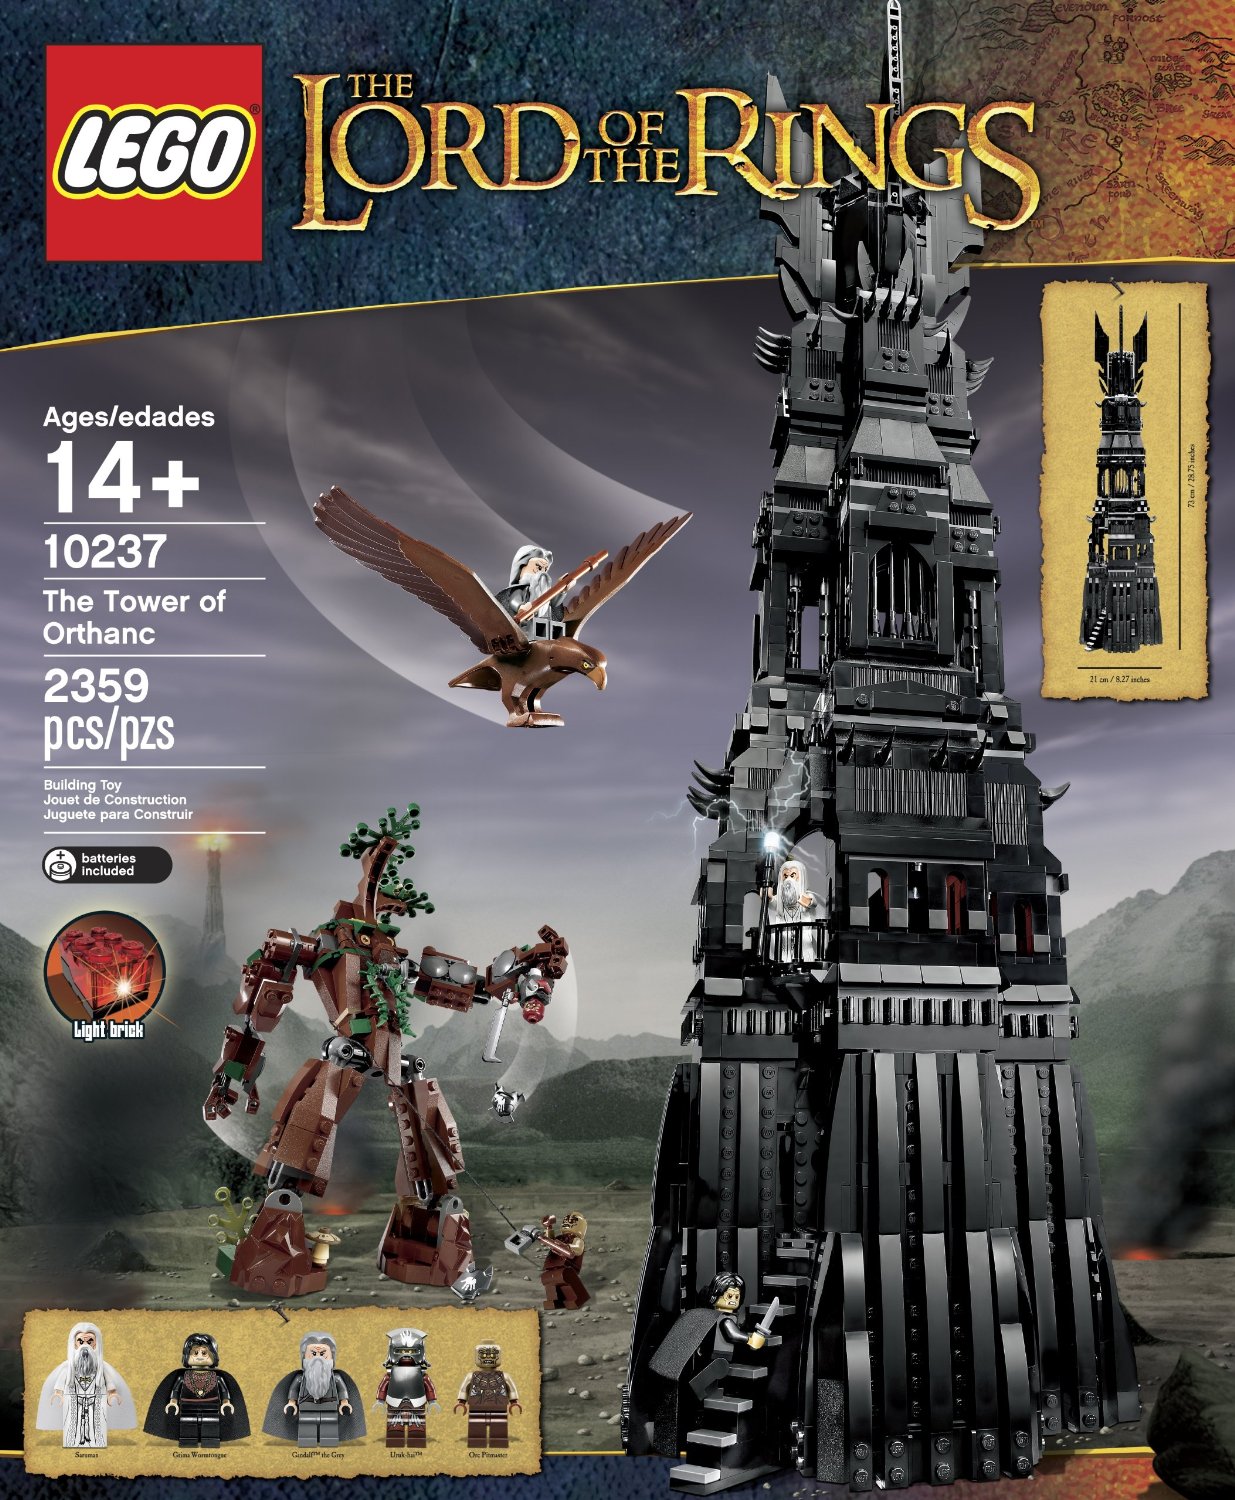 Shopping For LEGO Lord of the Rings 10237 Tower of Orthanc Building Set?